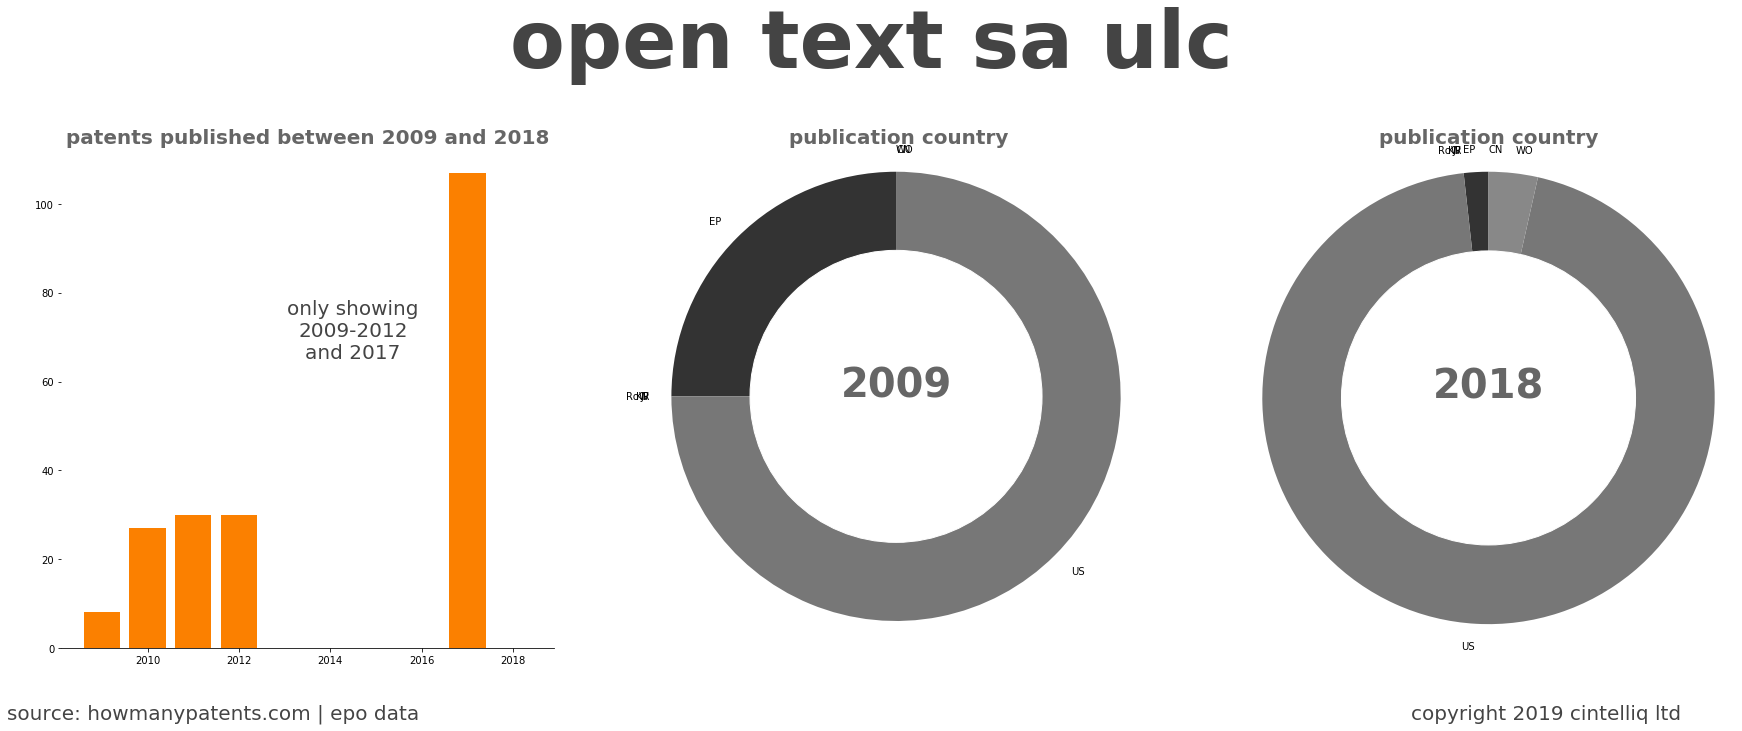 summary of patents for Open Text Sa Ulc